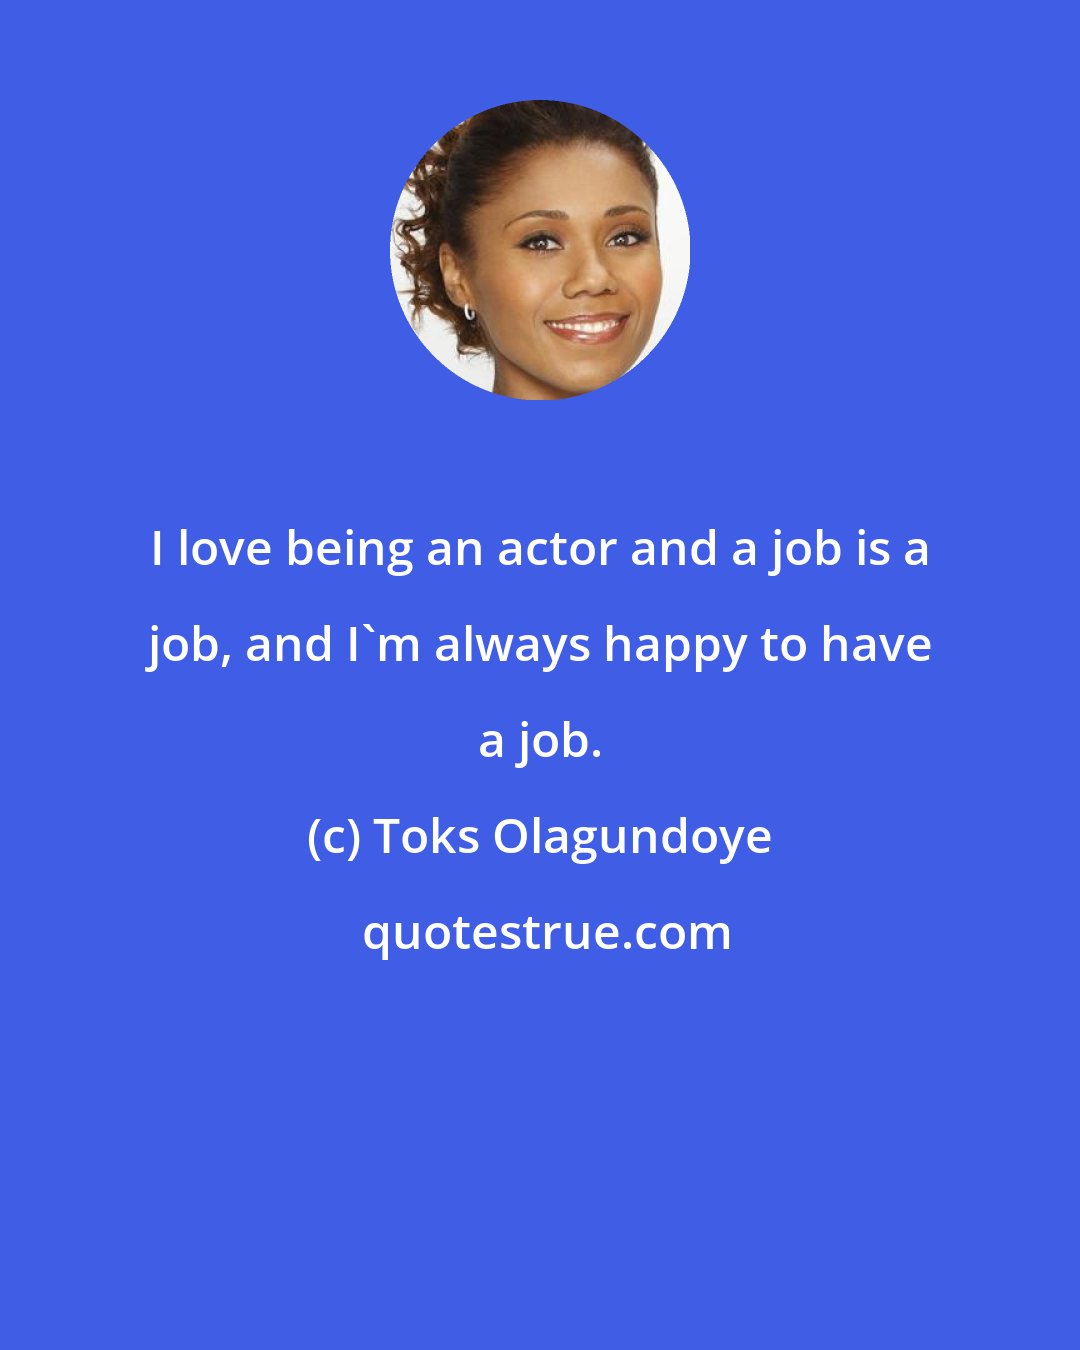 Toks Olagundoye: I love being an actor and a job is a job, and I'm always happy to have a job.